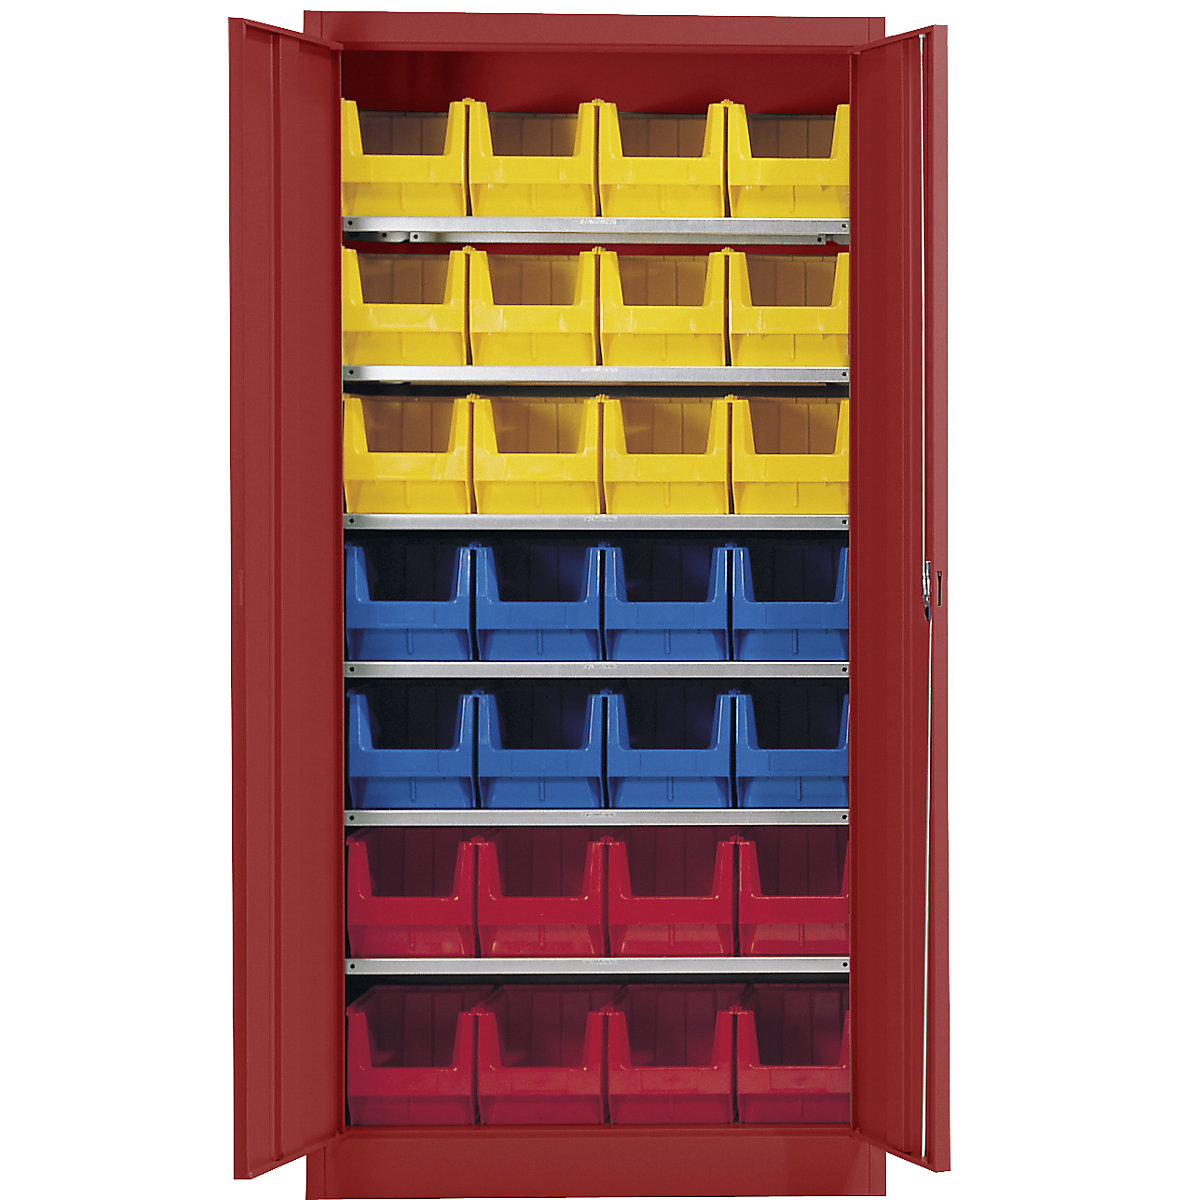 Storage cupboard, single colour – mauser, with 28 open fronted storage bins, 6 shelves, red-1